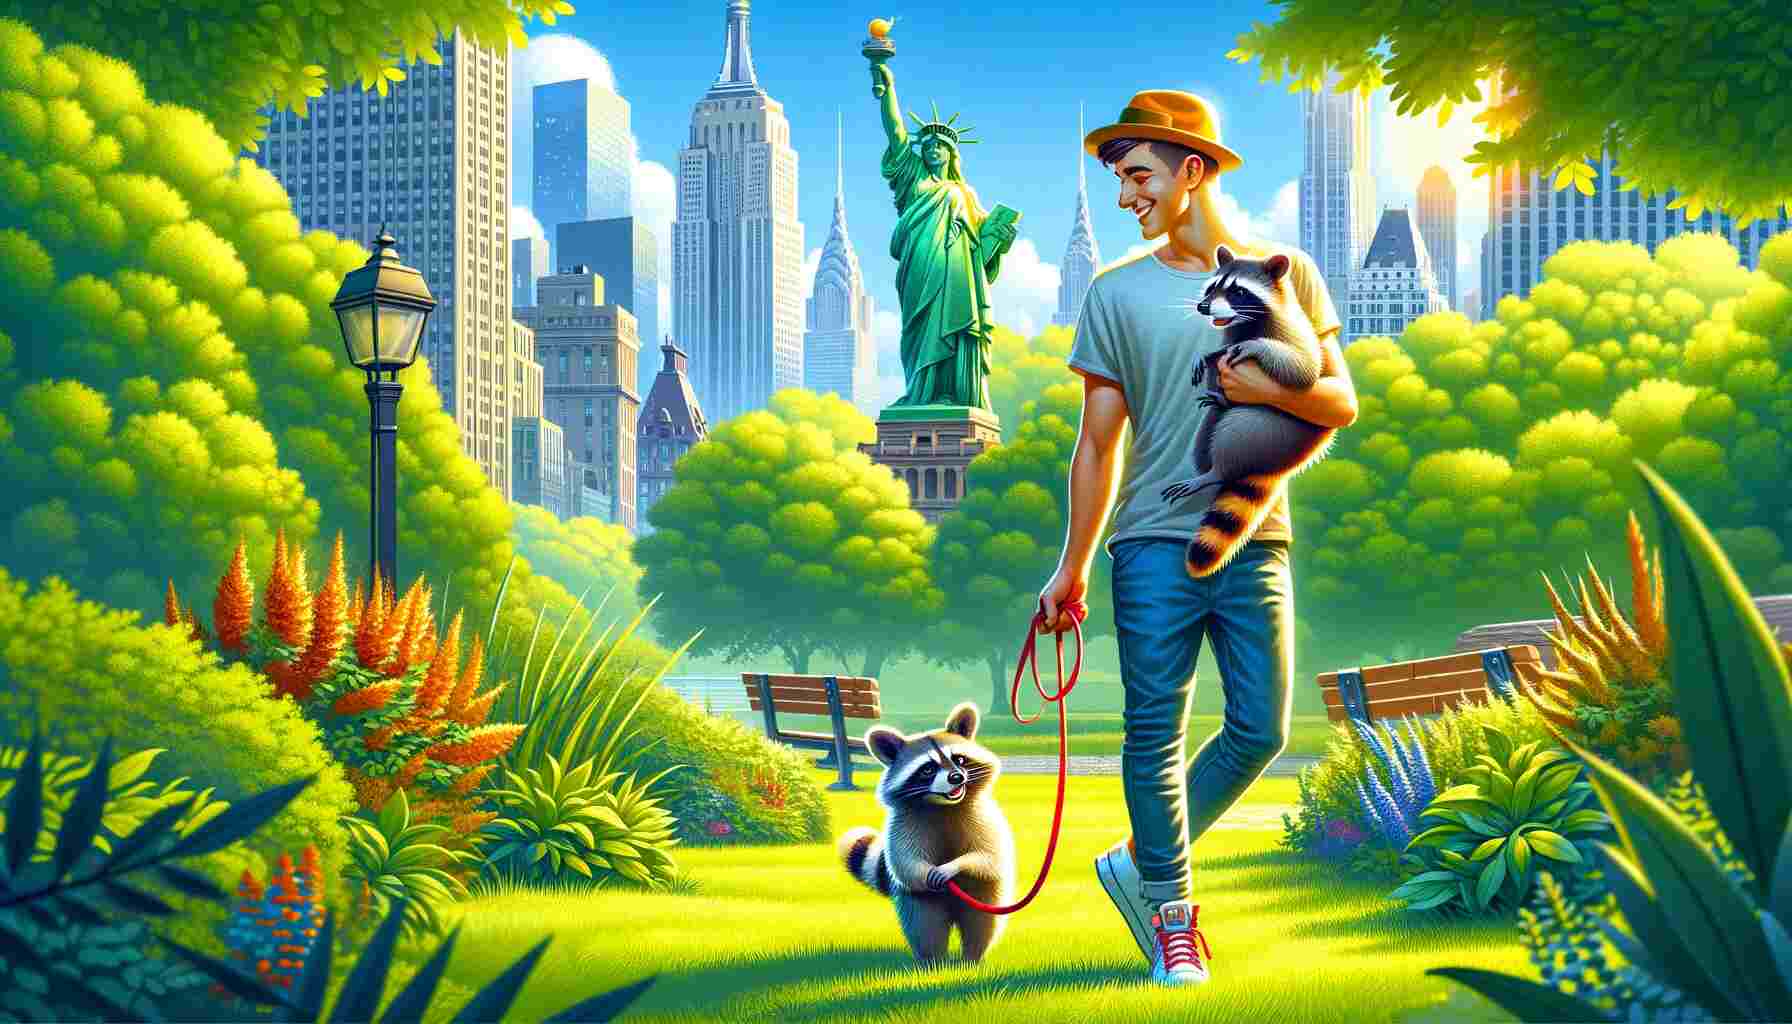 Here is the featured image for “Can You Have A Pet Raccoon In New York State,” showcasing a person in a lush park in New York with a pet raccoon, with iconic New York landmarks in the background.